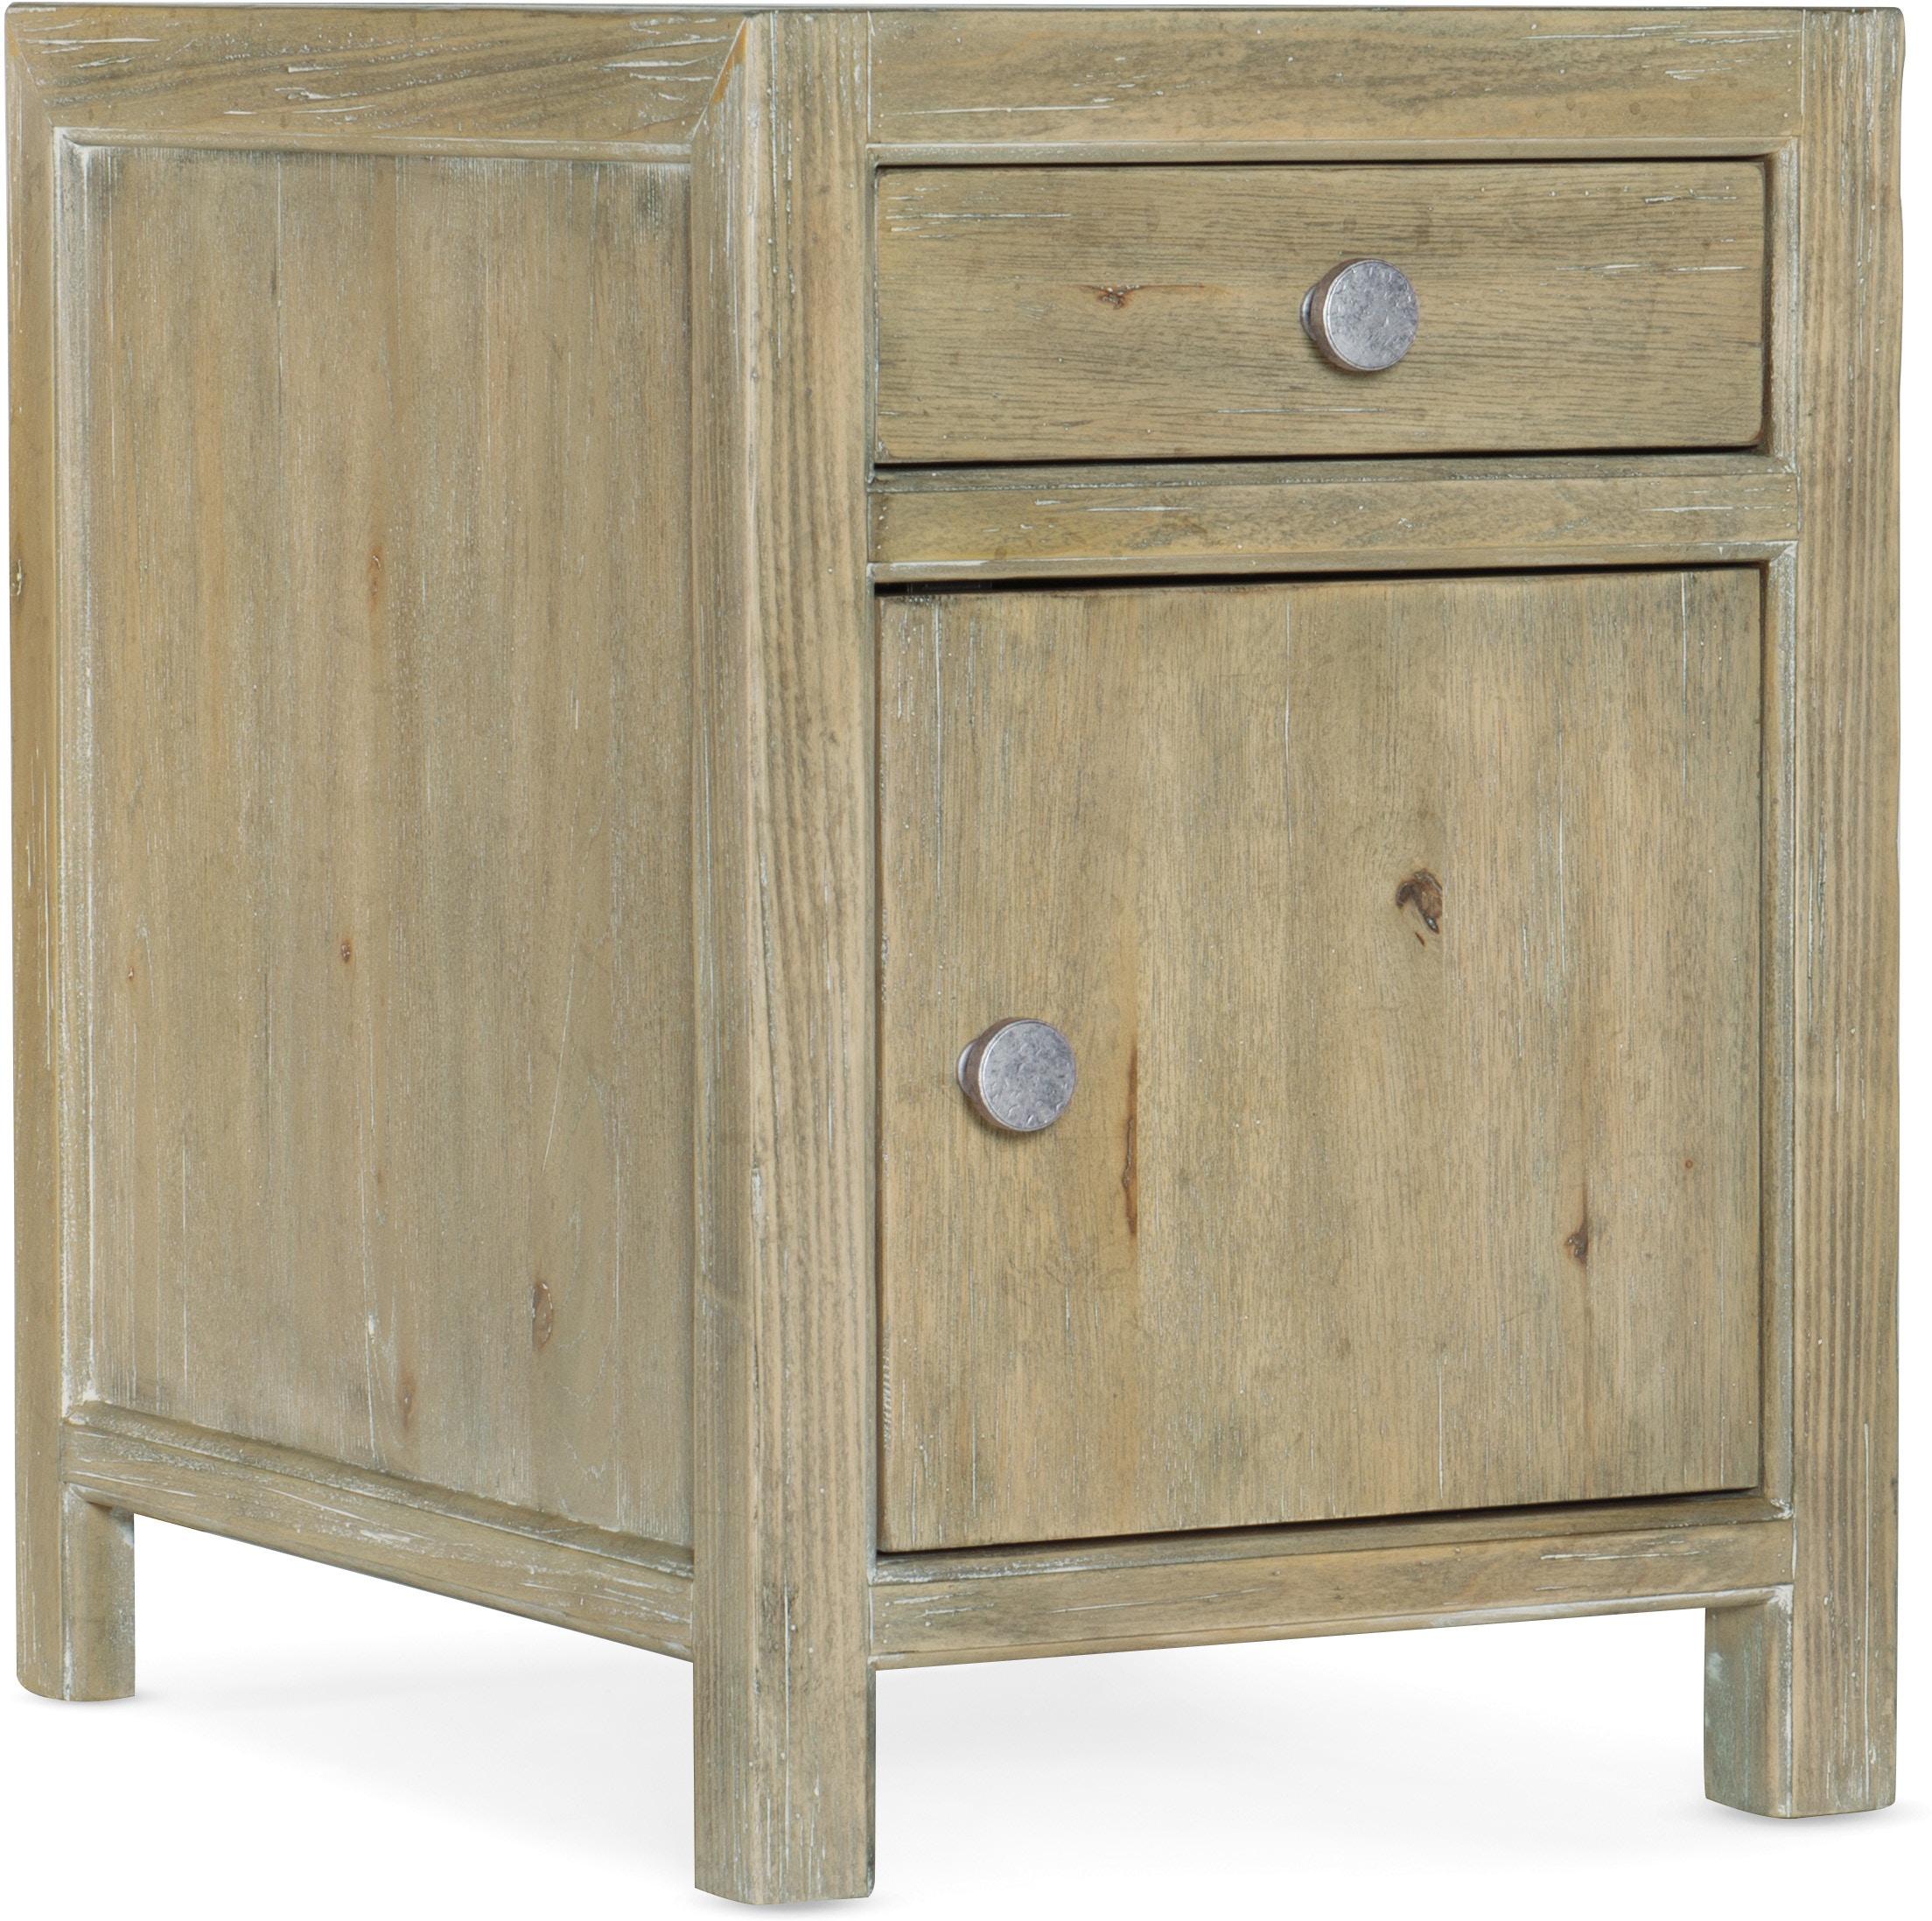 The Craftsmen - Barn Wood Style Bedside Table / End Table - Handmade in USA  - Without Drawer / Beach Wood